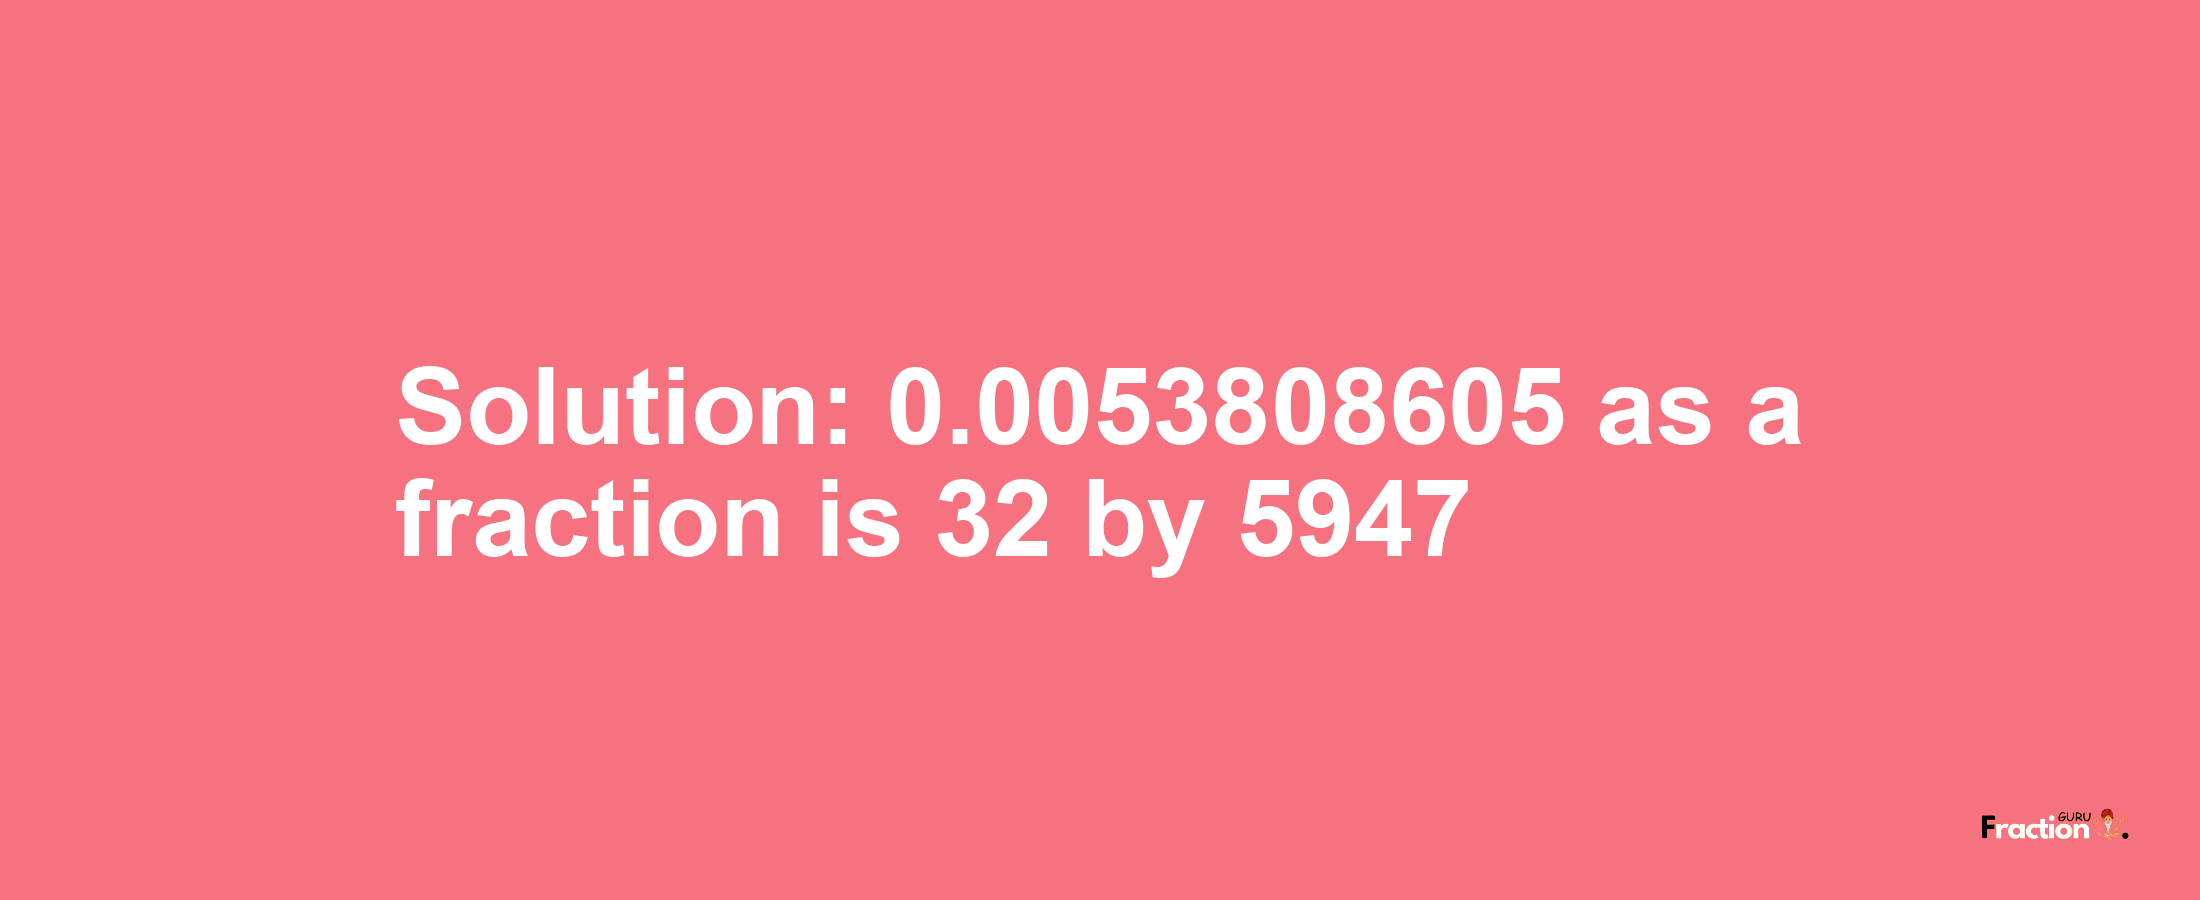 Solution:0.0053808605 as a fraction is 32/5947